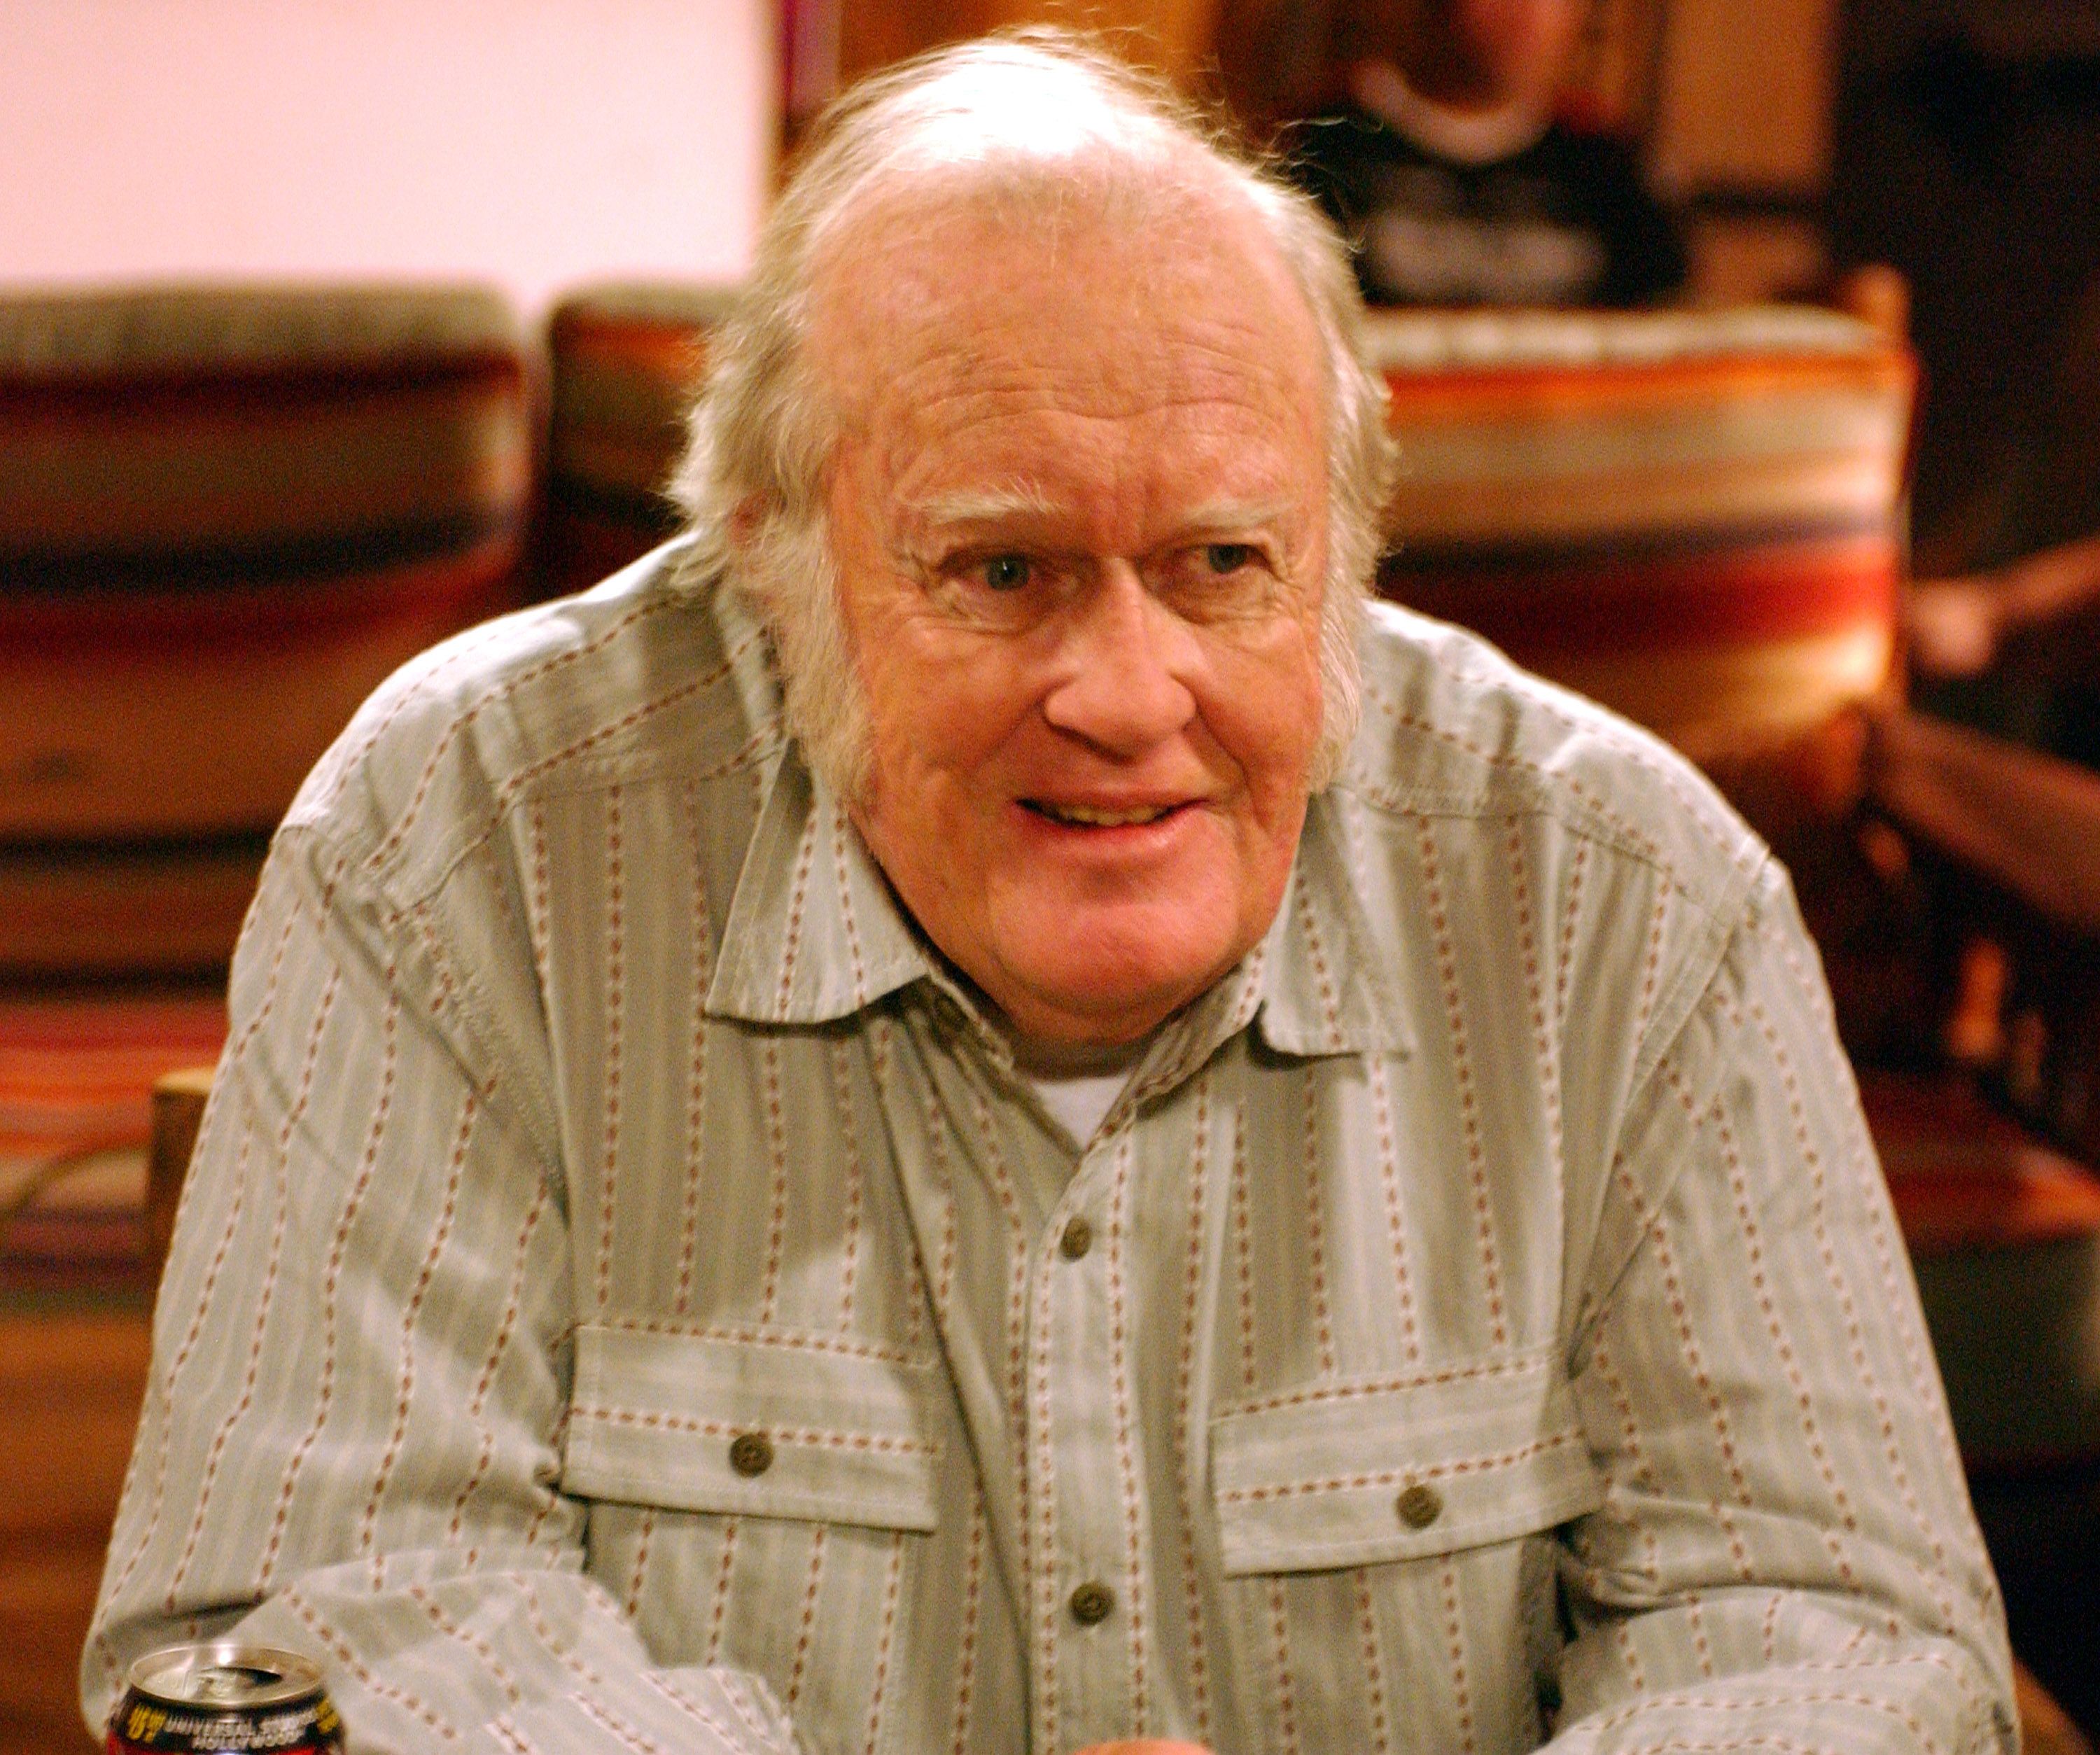 M. Emmet Walsh on the set of "Inn Trouble" on June 12, 2004, at Zaca Lake Retreat in Buellton, California, United States. | Source: Getty Images